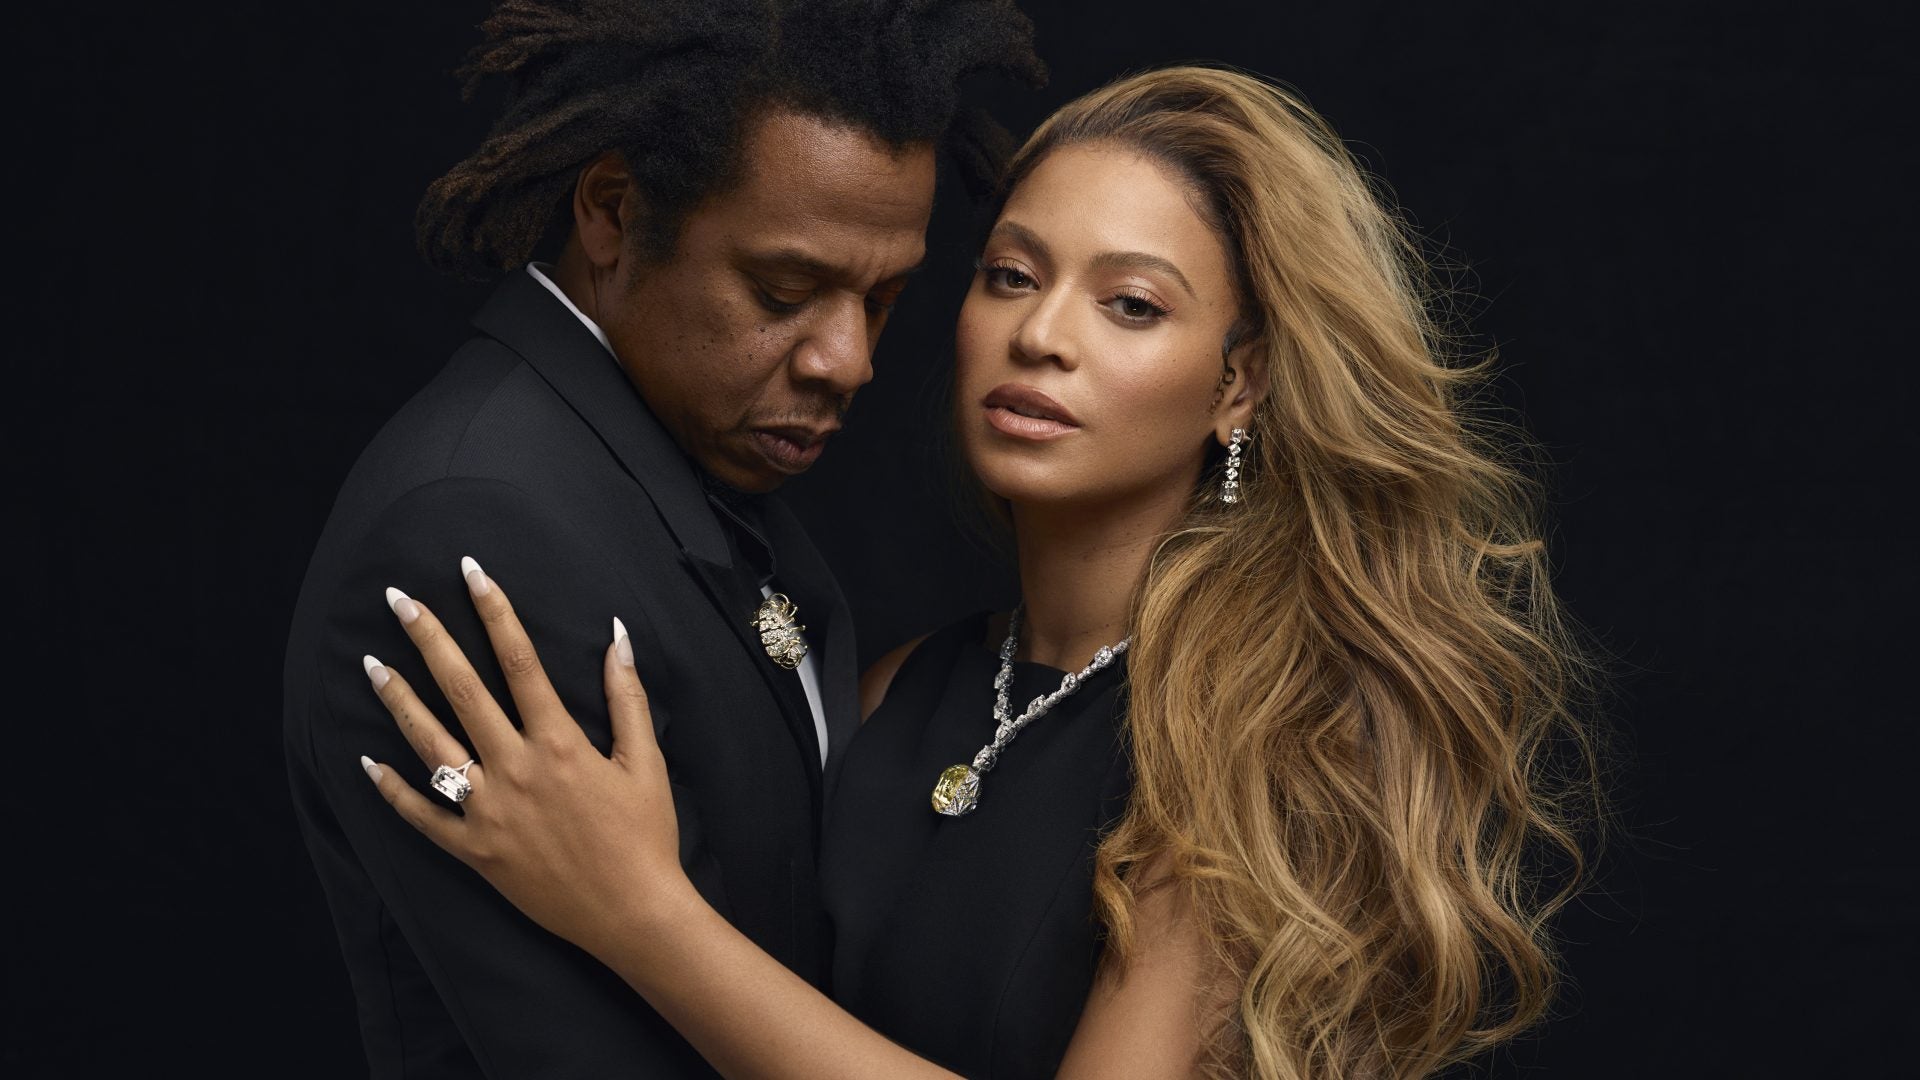 EXCLUSIVE: Watch Beyoncé and Jay-Z's Sentimental "About Love" Campaign Film for Tiffany & Co.